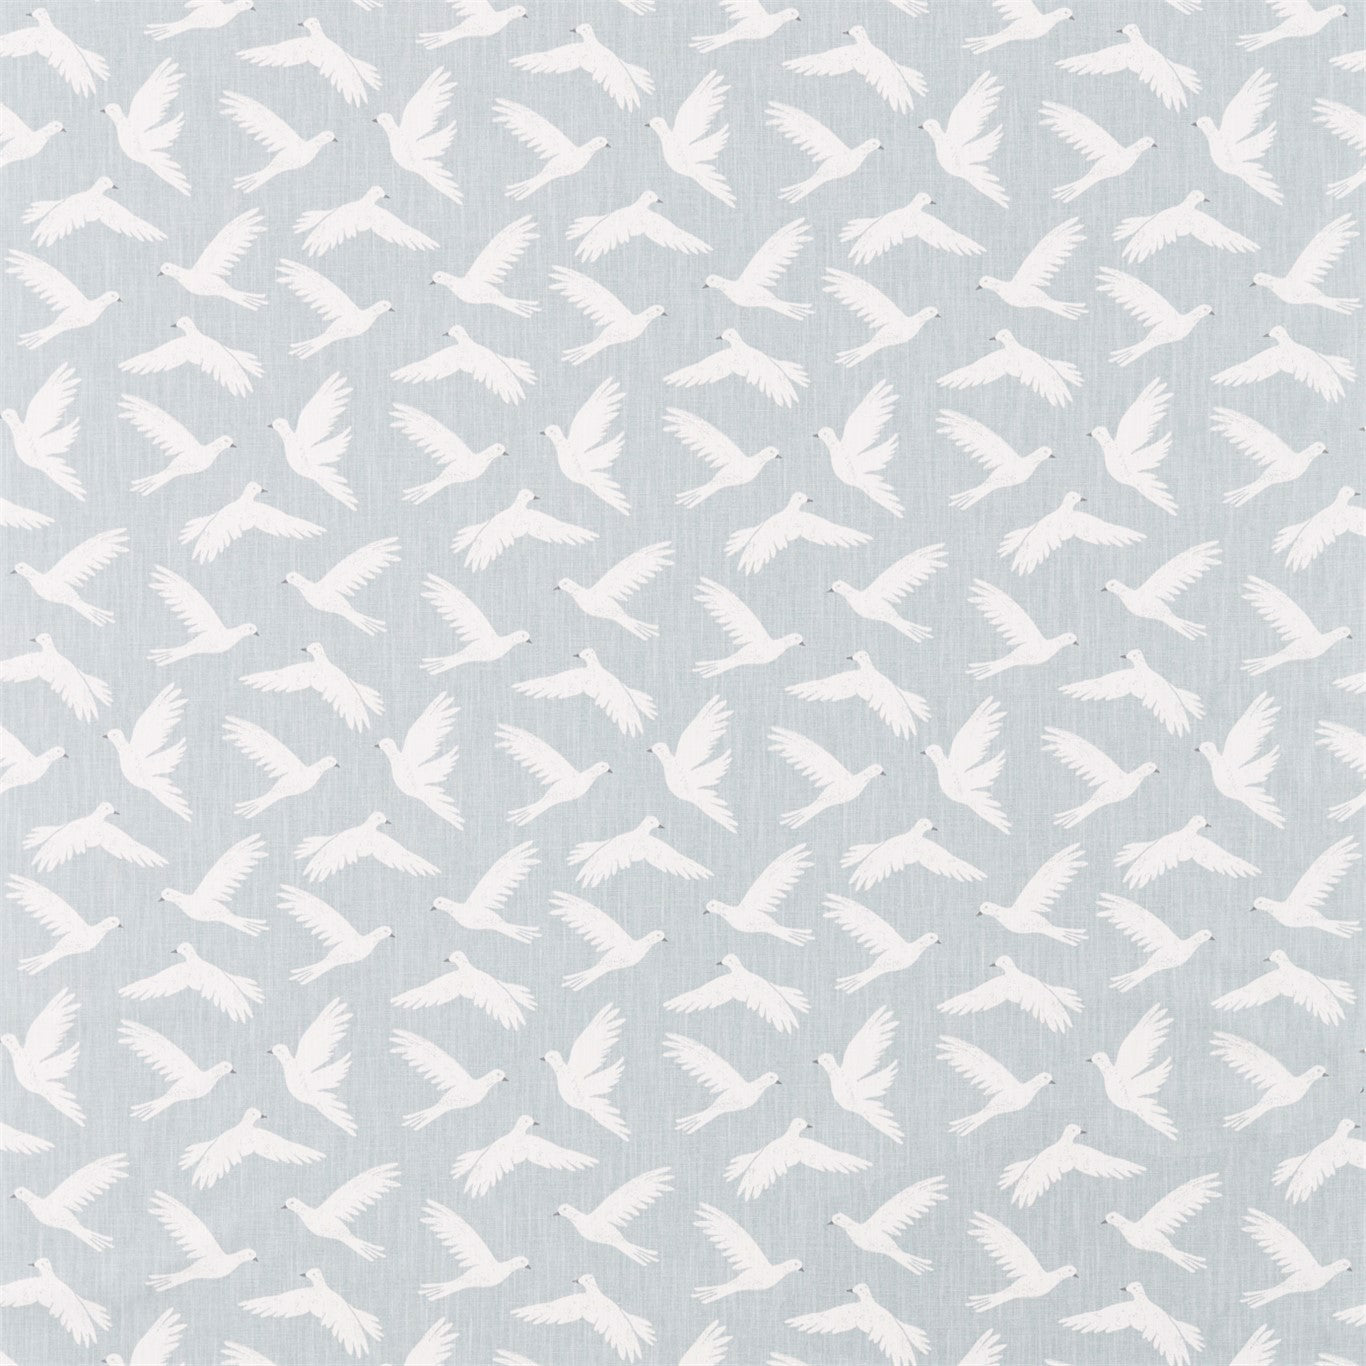 Paper Doves Fabric by Sanderson Home